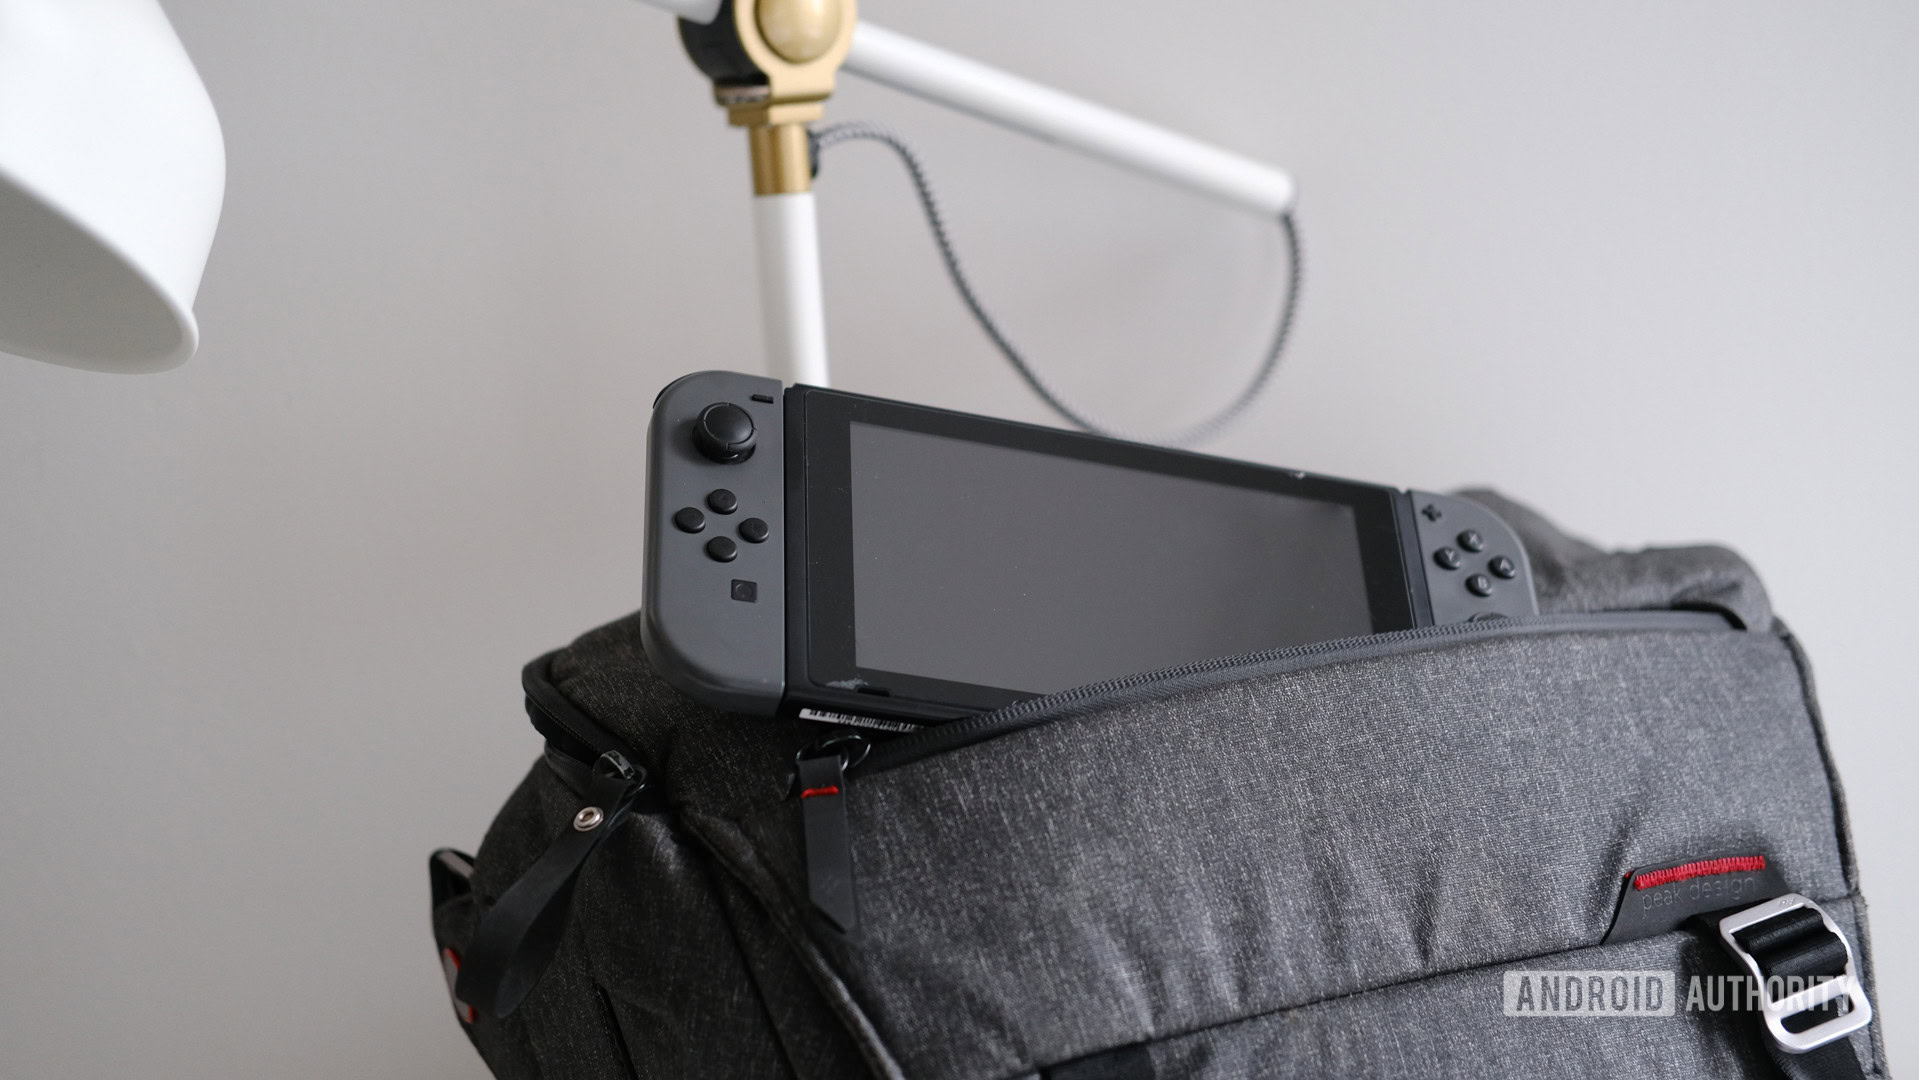 Nintendo Switch OLED model has improved Joy-Cons, but drift 'unavoidable' -  Polygon